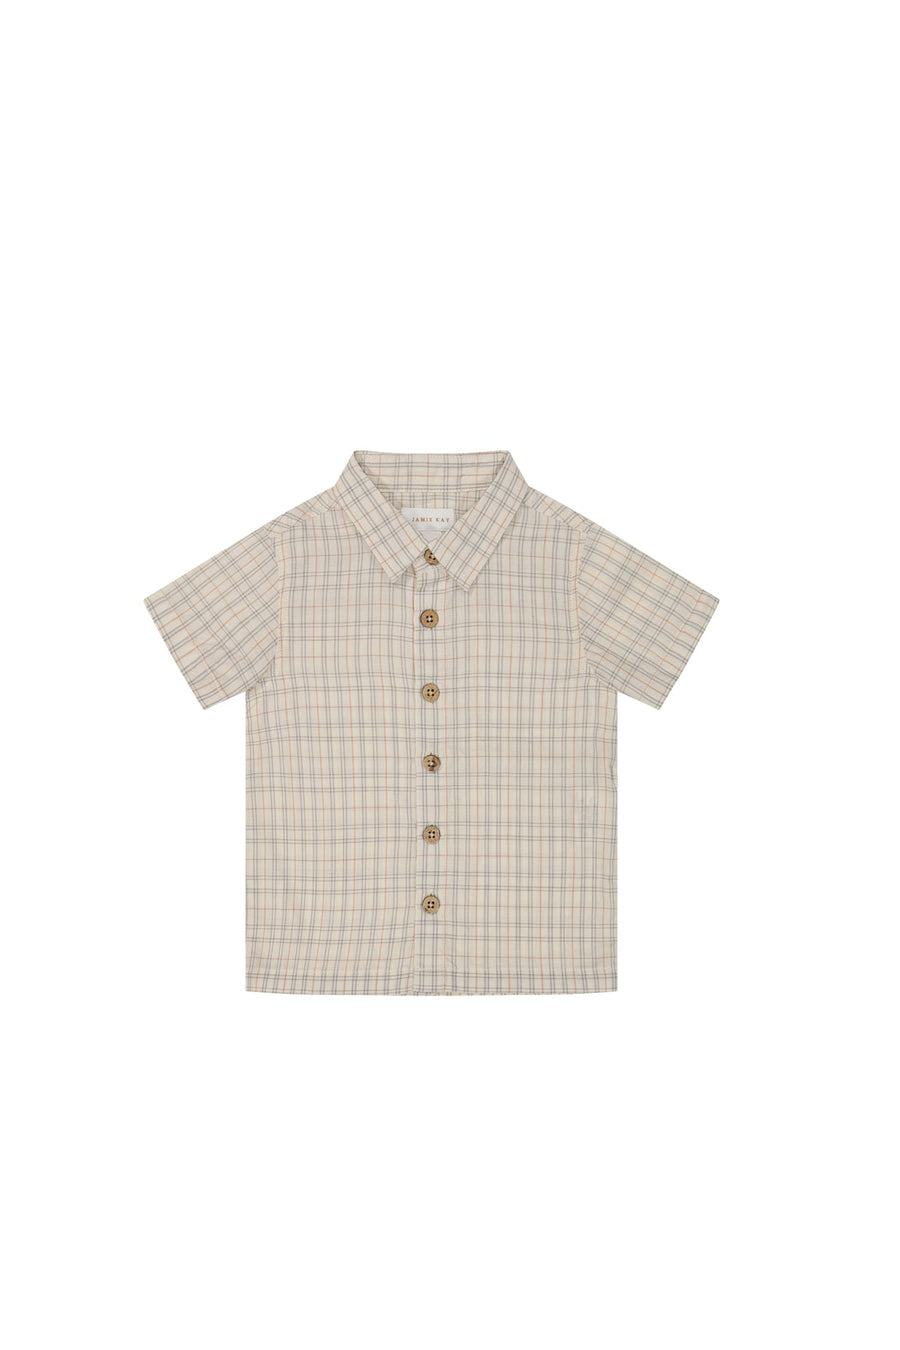 Organic Cotton Quentin Short Sleeve Shirt - Billy Check Childrens Top from Jamie Kay USA